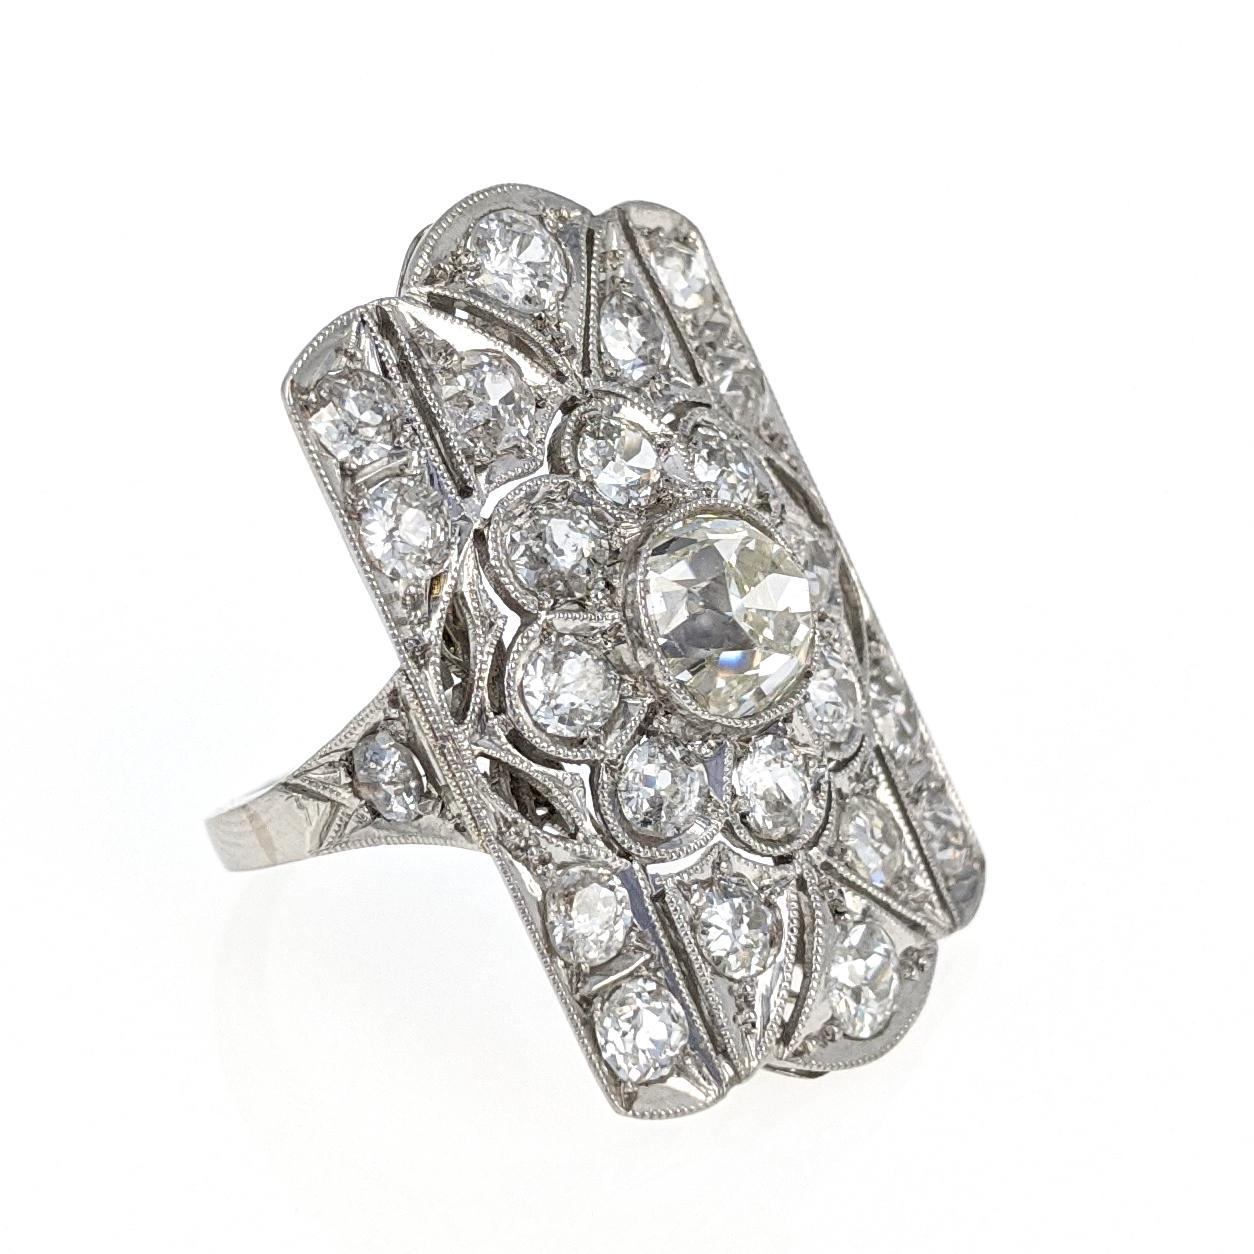 This ring centers upon nine Old European-Cut diamonds in a floral pattern. It is accented by sixteen additional diamonds for a total diamond weight of approximately 3 carats. The ring is expertly crafted in platinum with delicate milgrain details